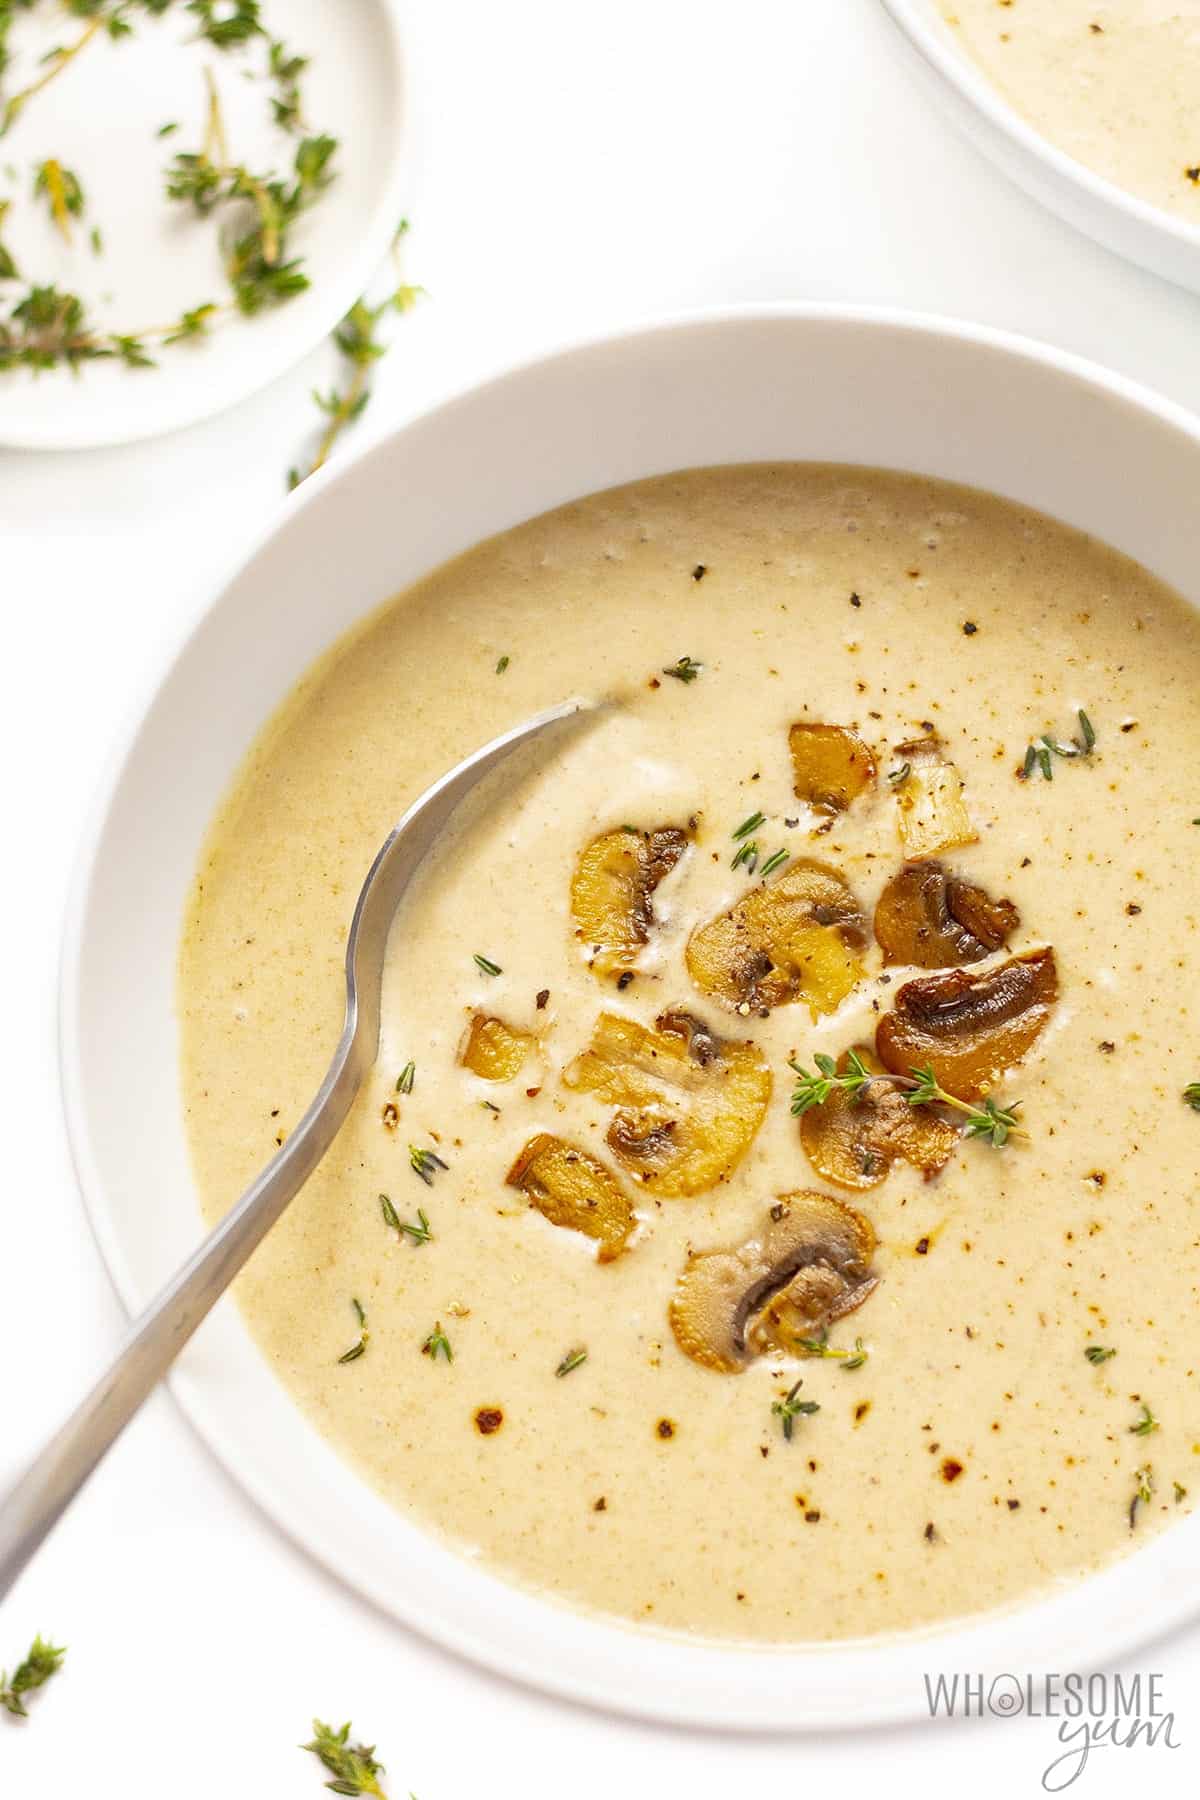 Low carb mushroom soup in a bowl ready to eat